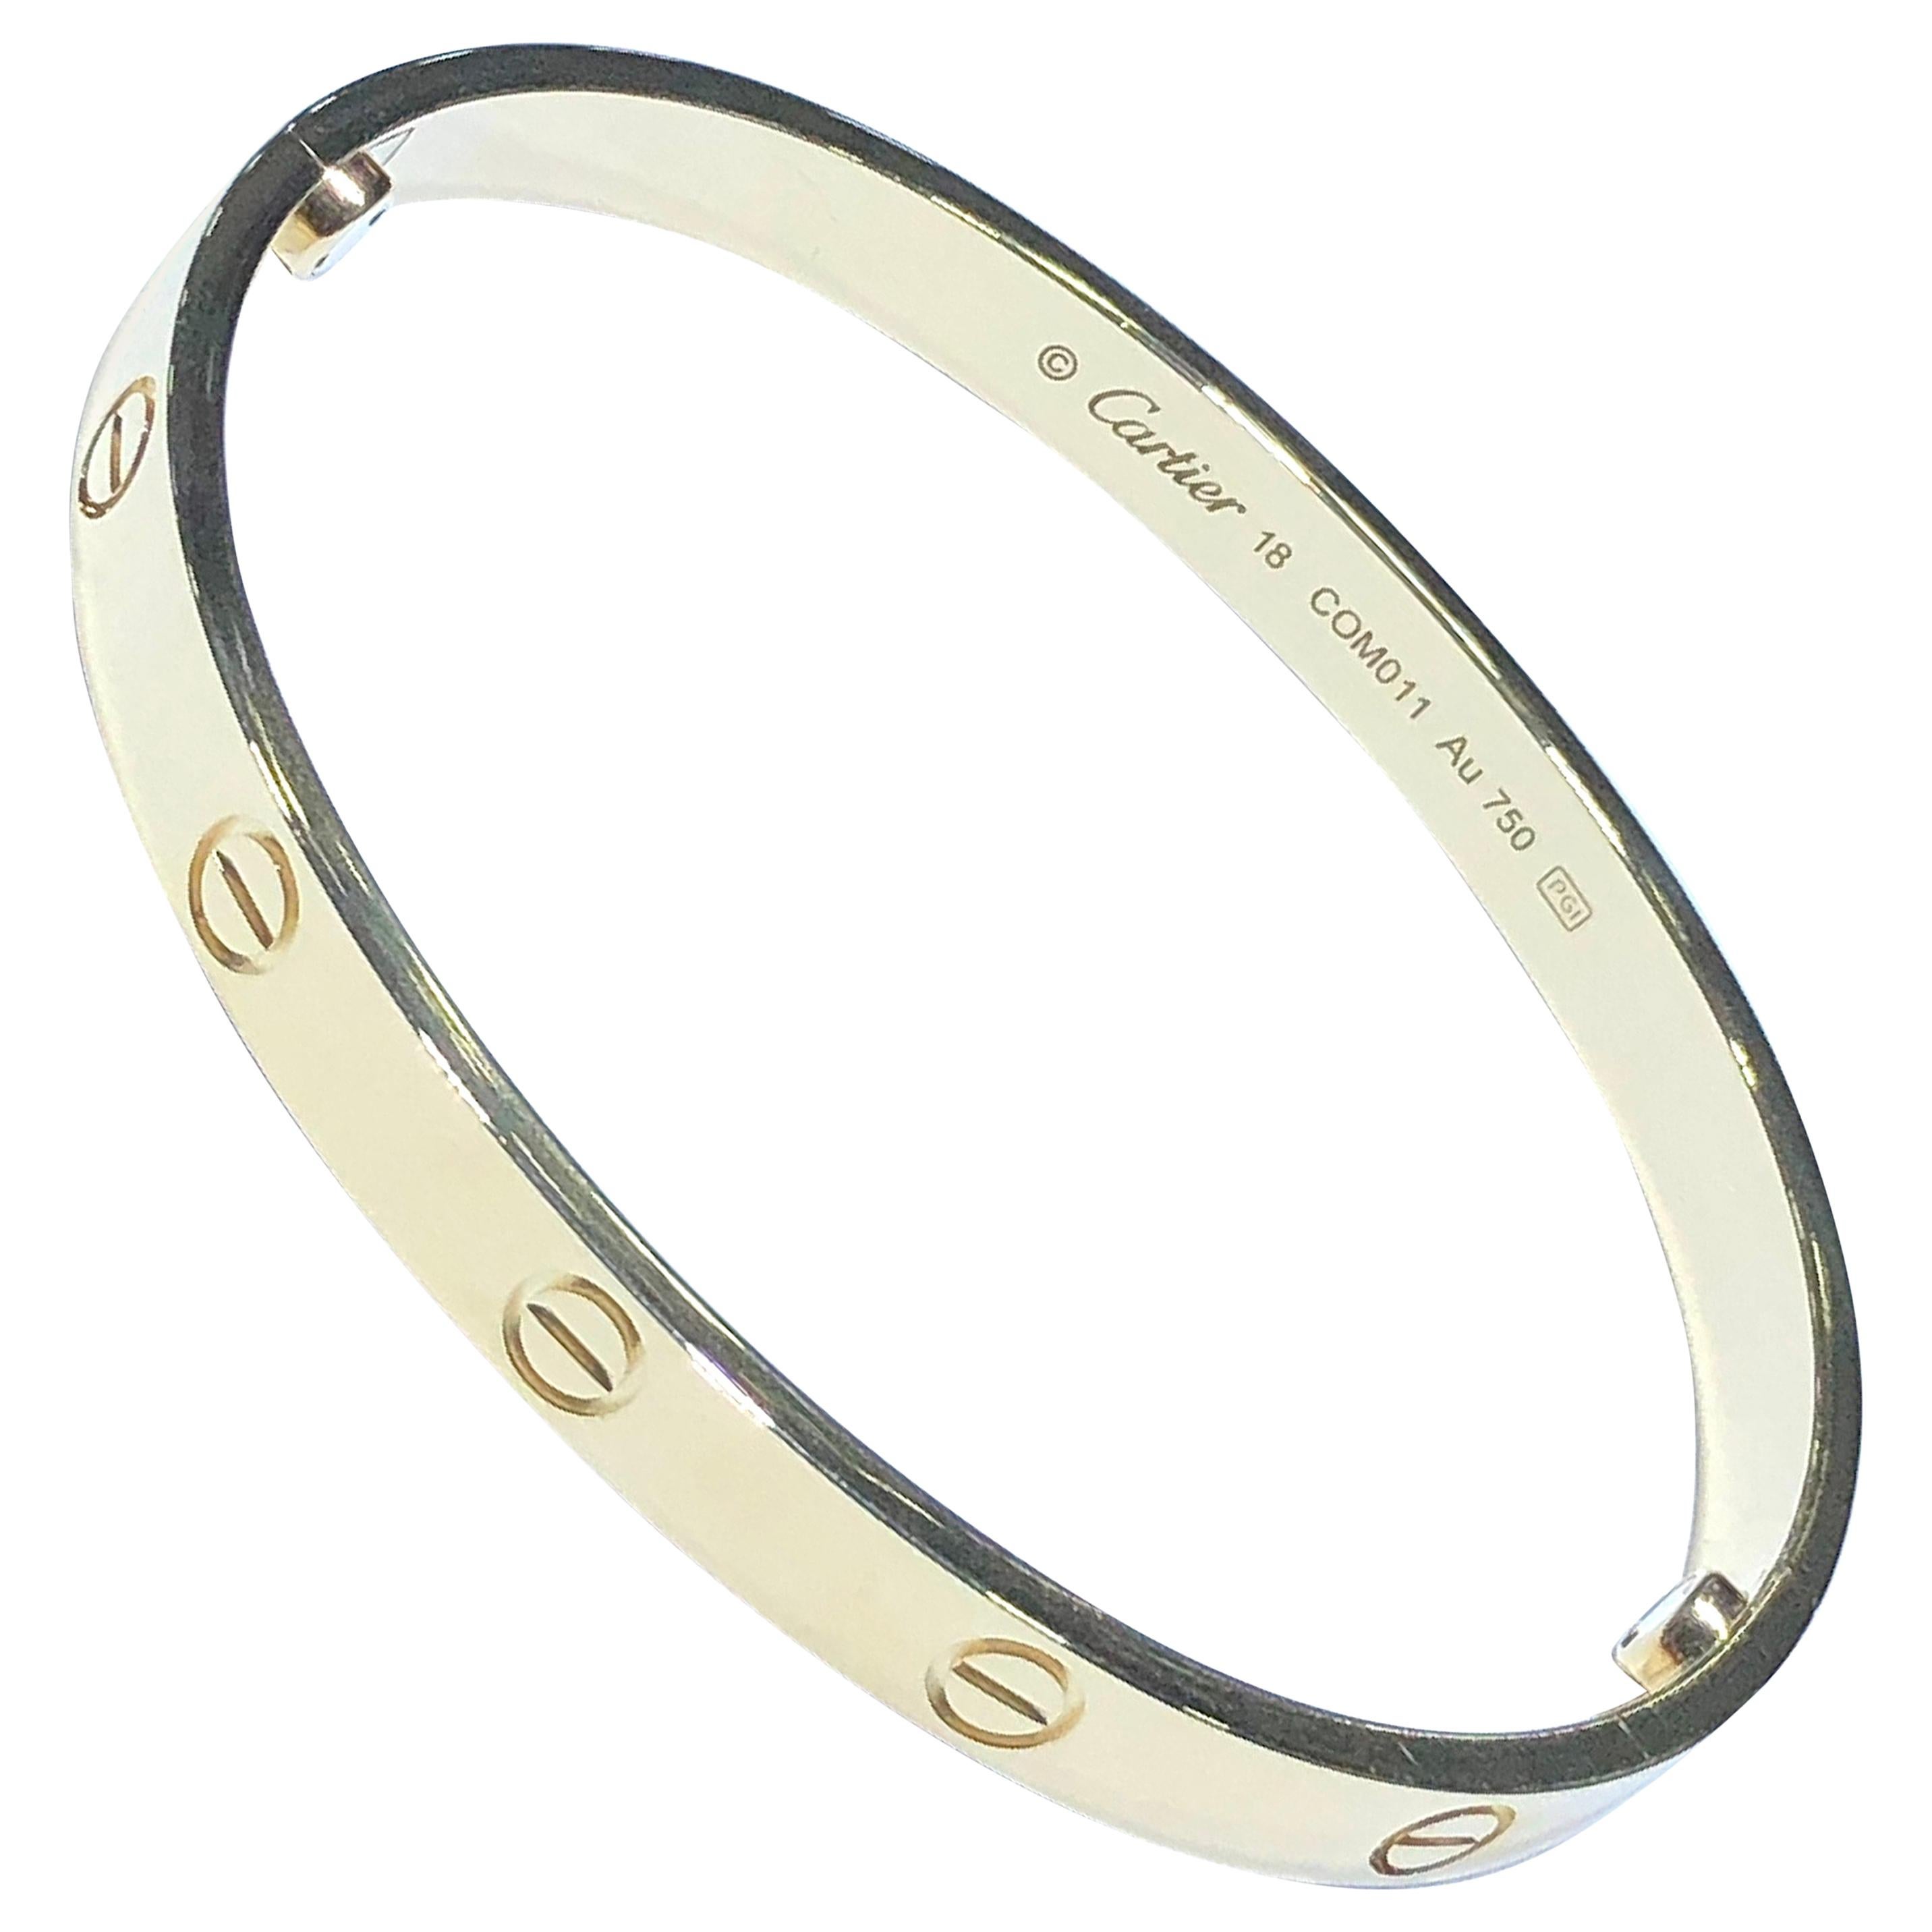 A signature 18k yellow gold Cartier bracelet from the Love collection. The bracelet is a size 18 and has a gross weight of 32.50 grams. Original box and key included. Pristine condition, shows no scratches or wear. Bracelet is hallmarked Serial #